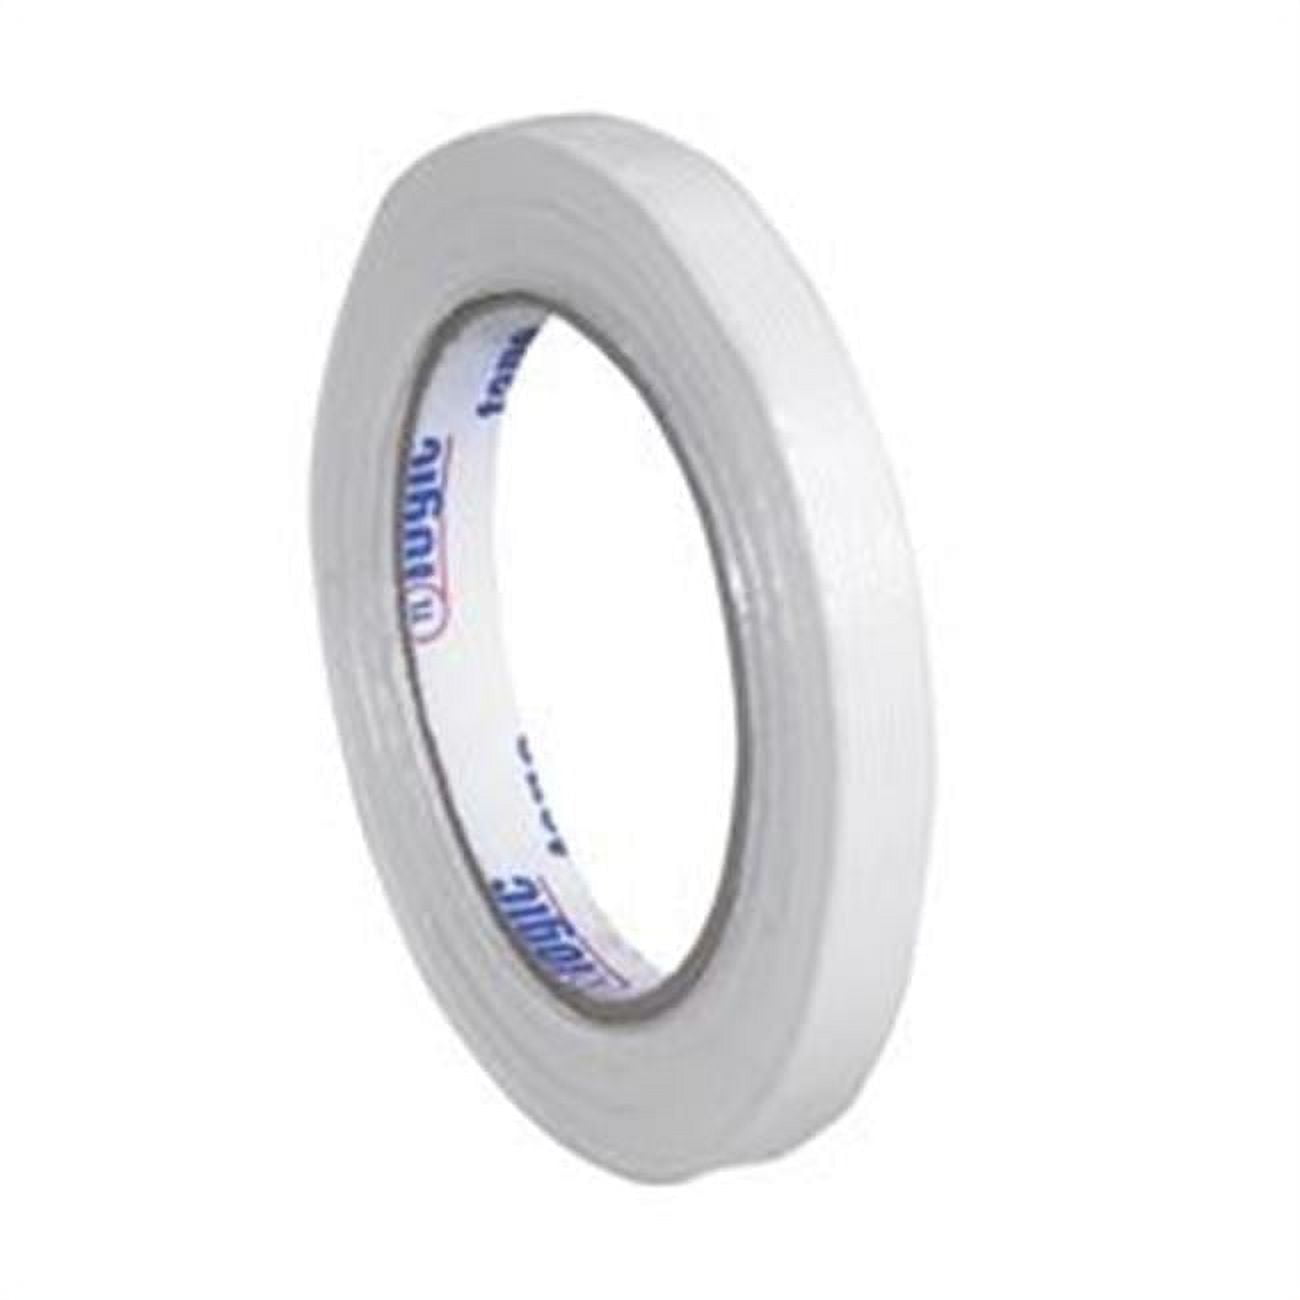 UPC 848109022277 product image for Tape Logic T913130012PK 0.50 in. x 60 yards 1300 Strapping Tape, Clear - Pack of | upcitemdb.com